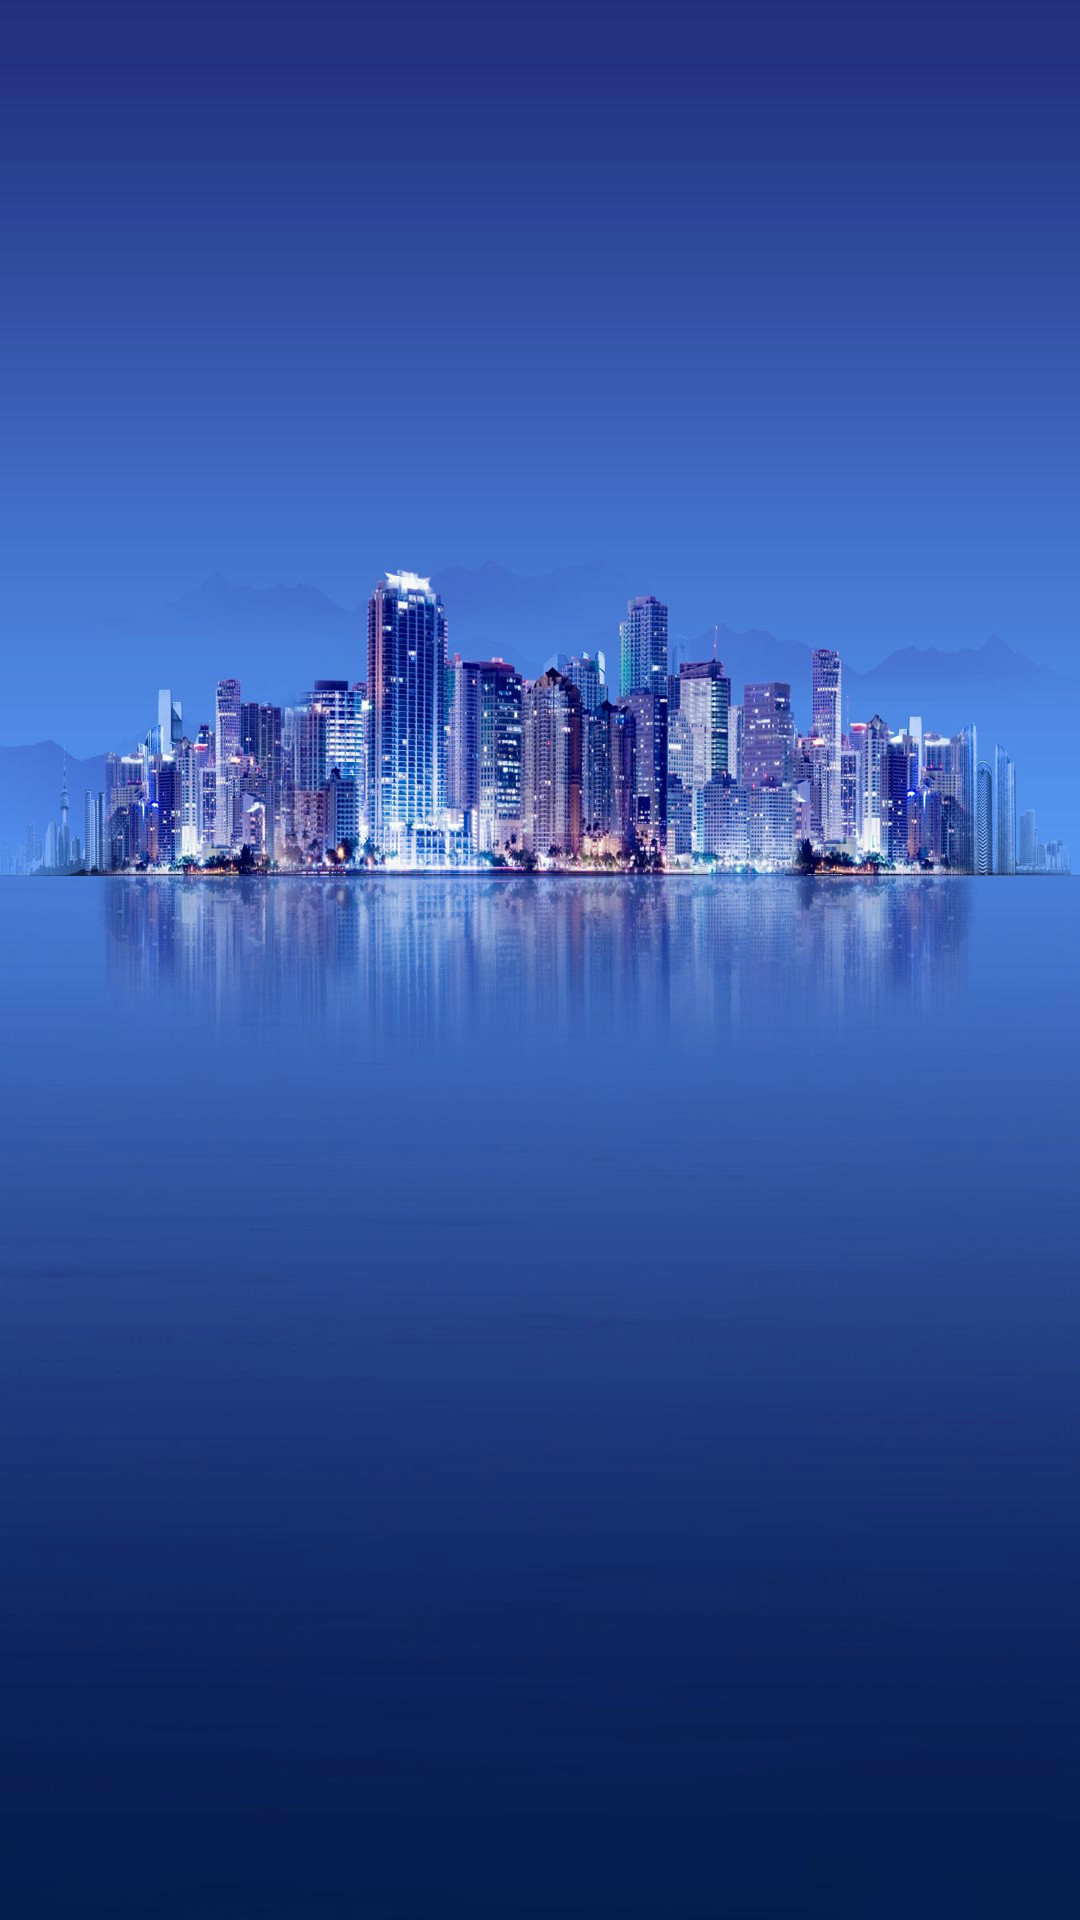 1080x1920 Cool Blue Skyscraper iPhone Wallpaper HD for iPhone 6s, 6, 5s, 5c About